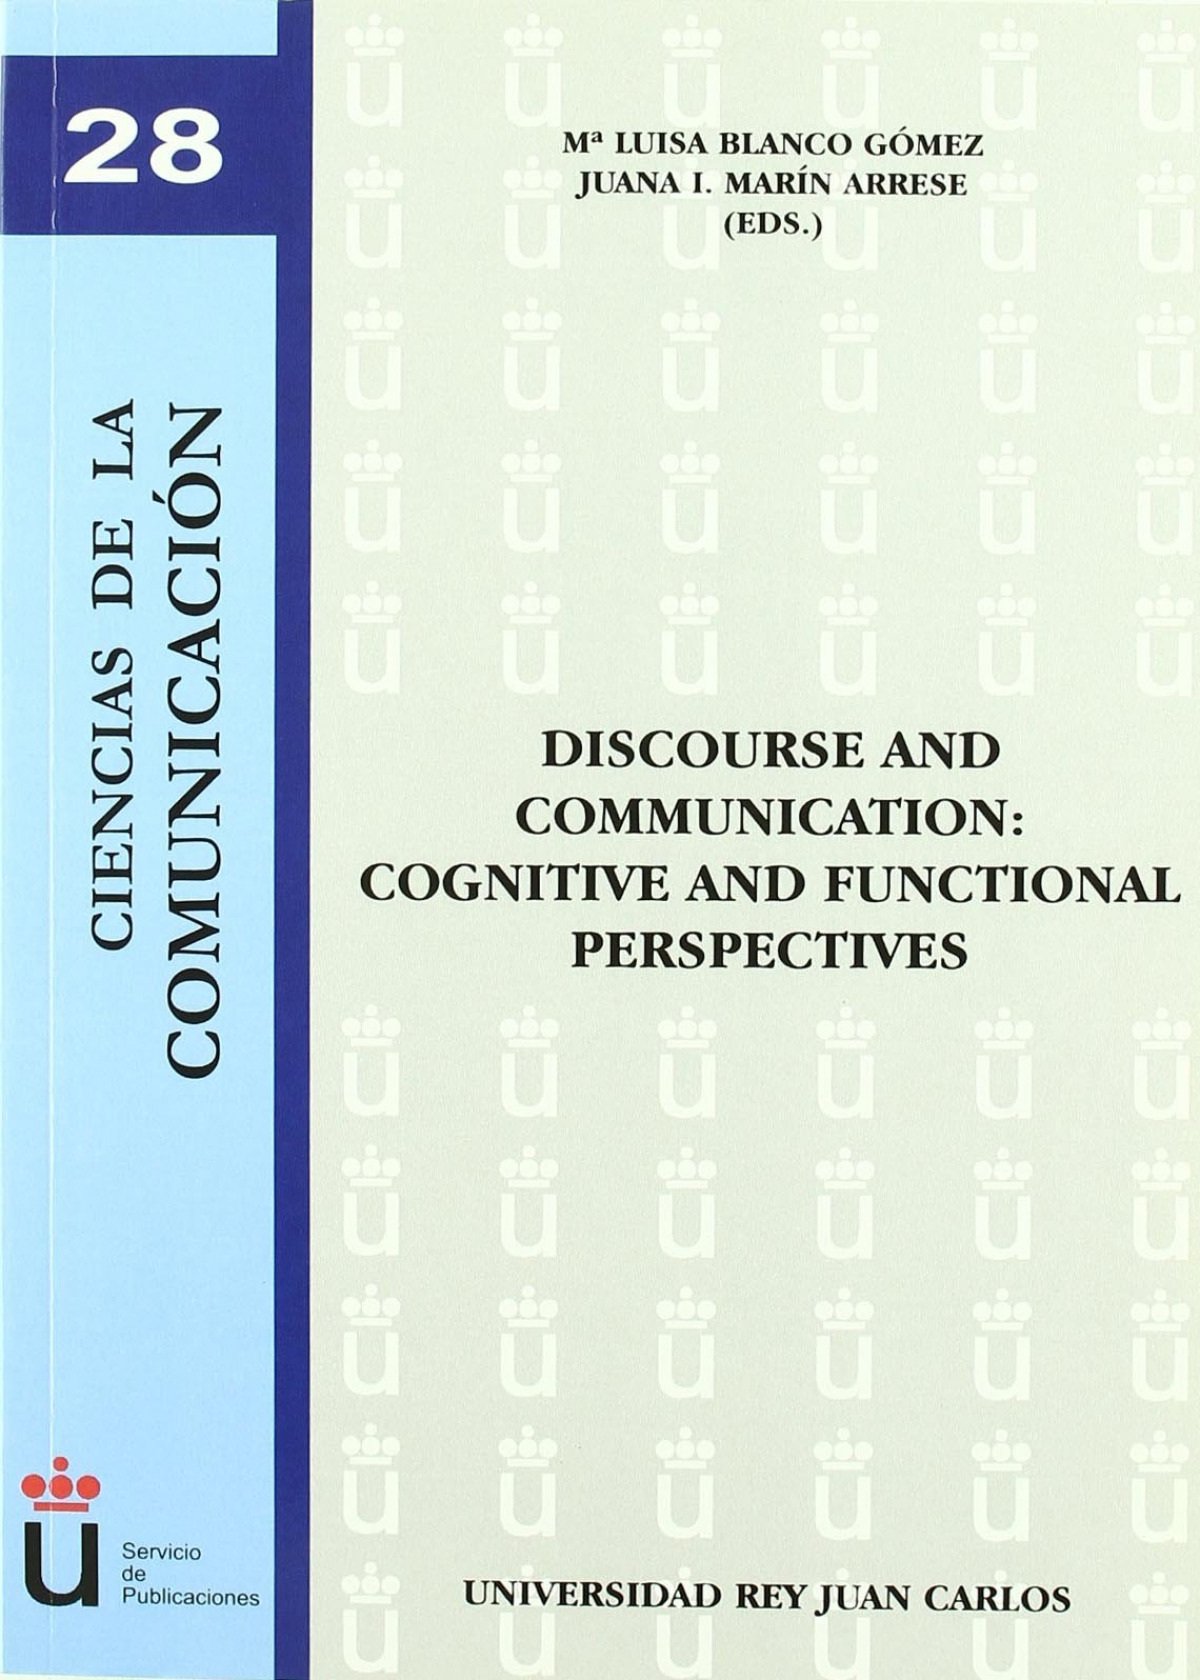 Discourse and communication: cognitive and functional perspectives - Marín Arrese, Juana I.